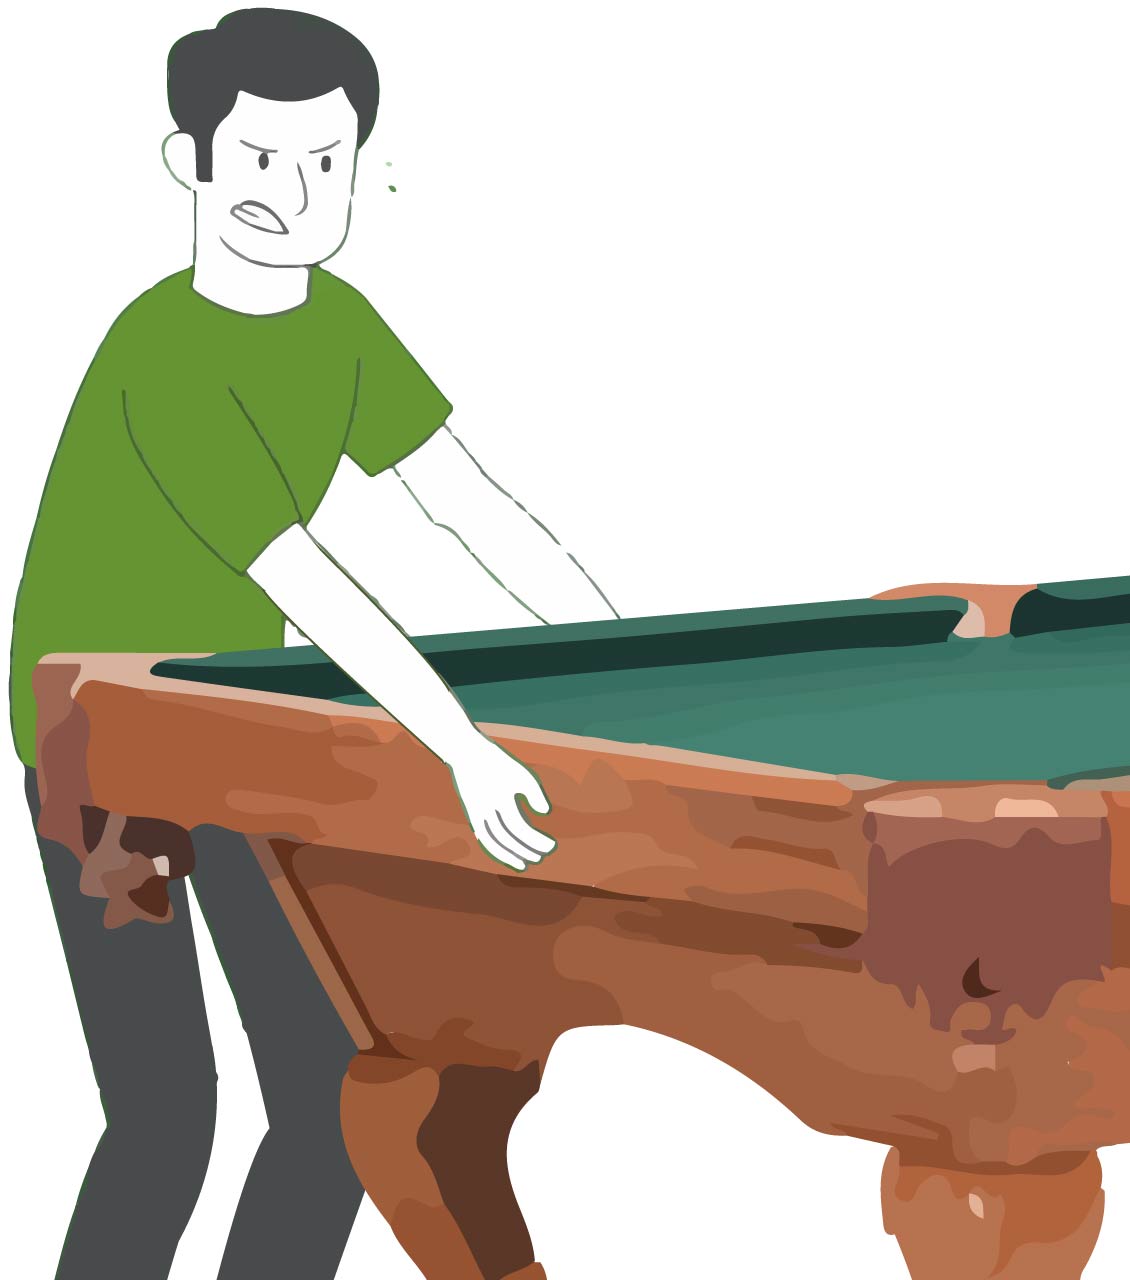 Billiards Pool Table Removal Services